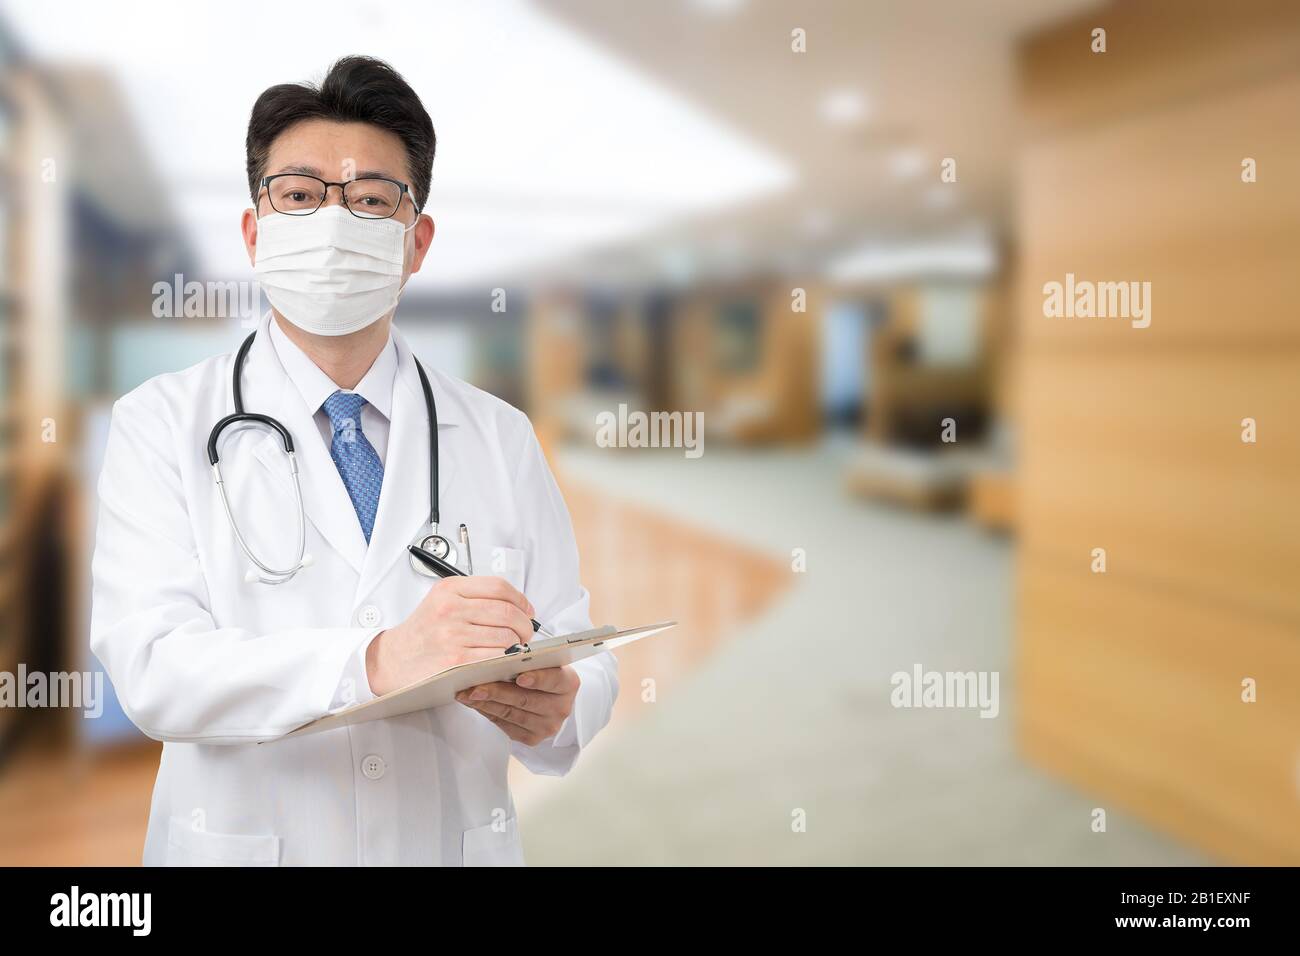 An Asian male doctor holding a medical chart at the hospital while wearing a mask Stock Photo